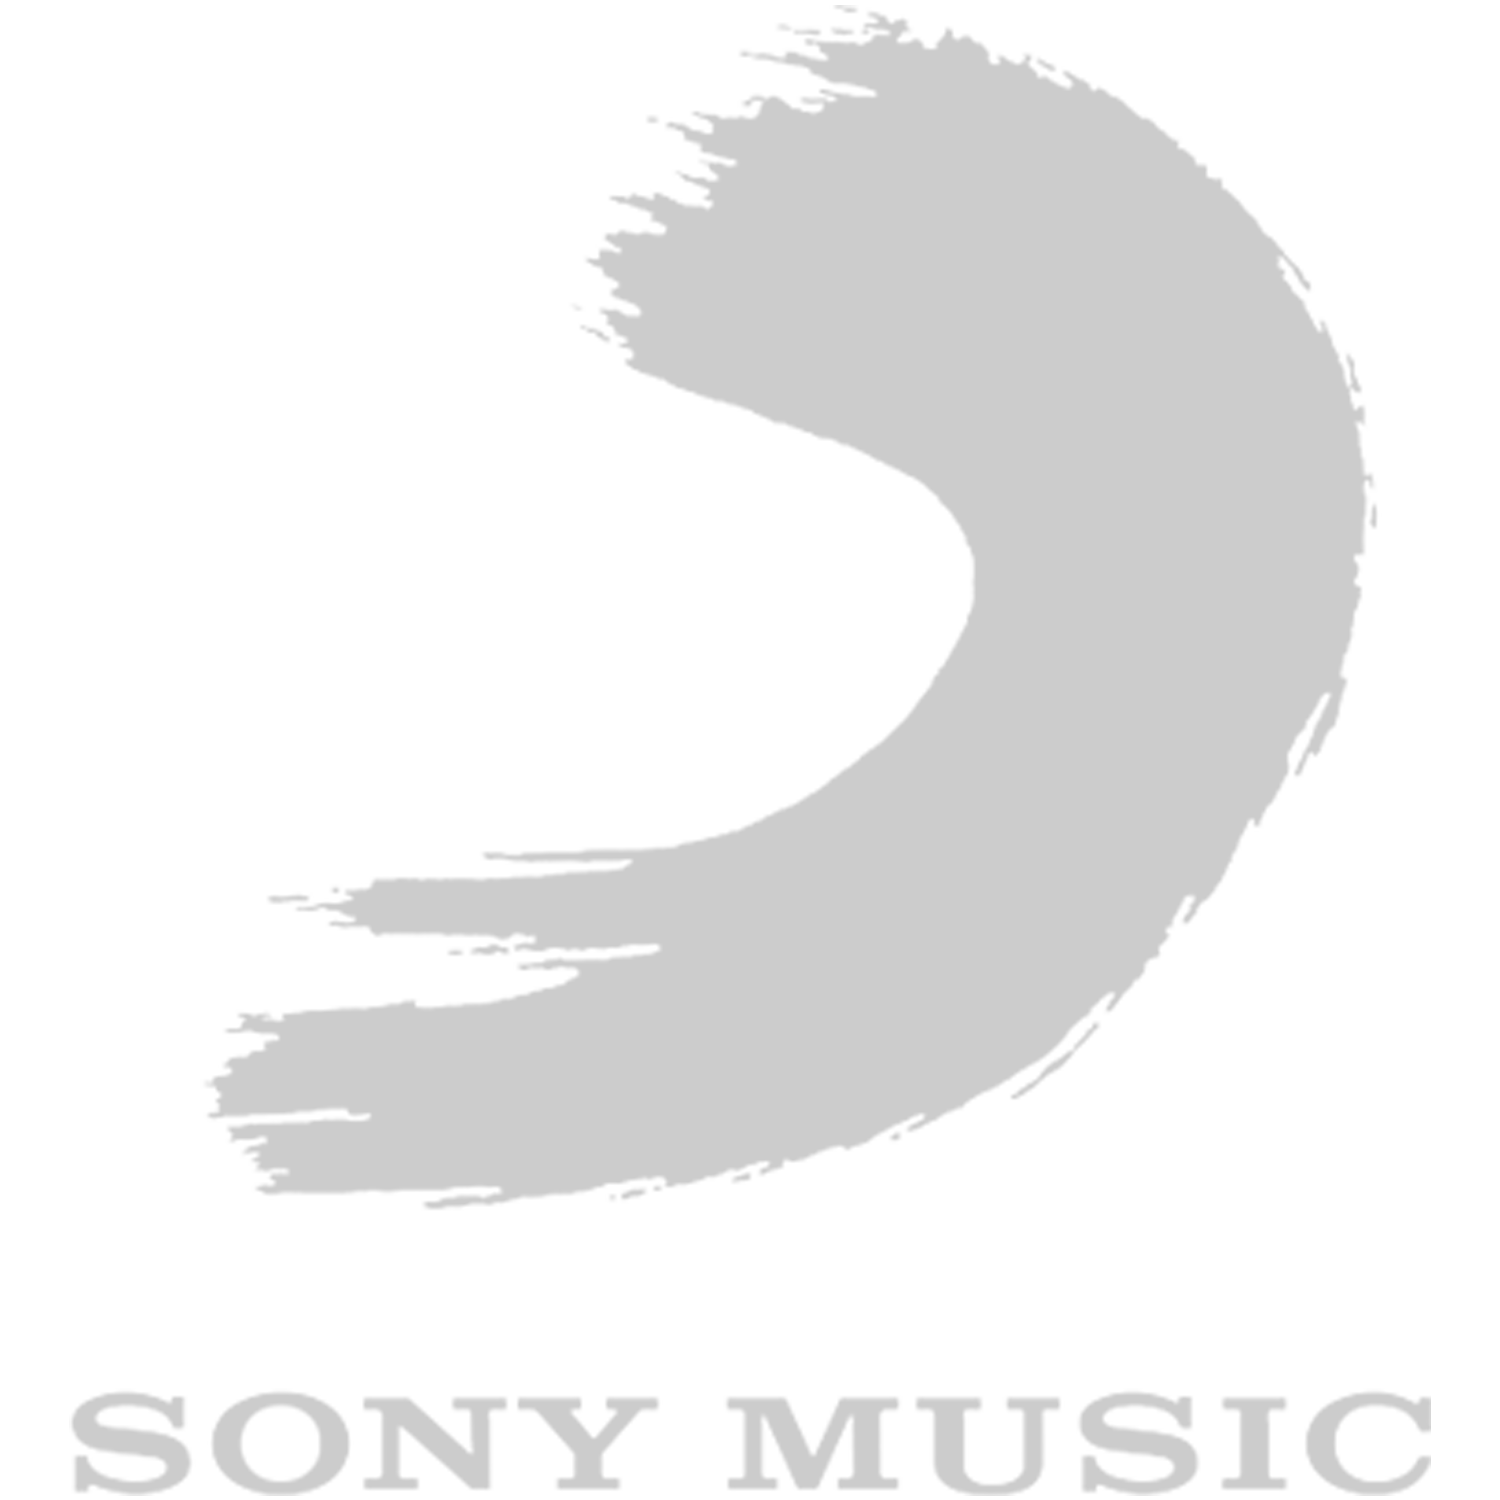 Sony - light.png